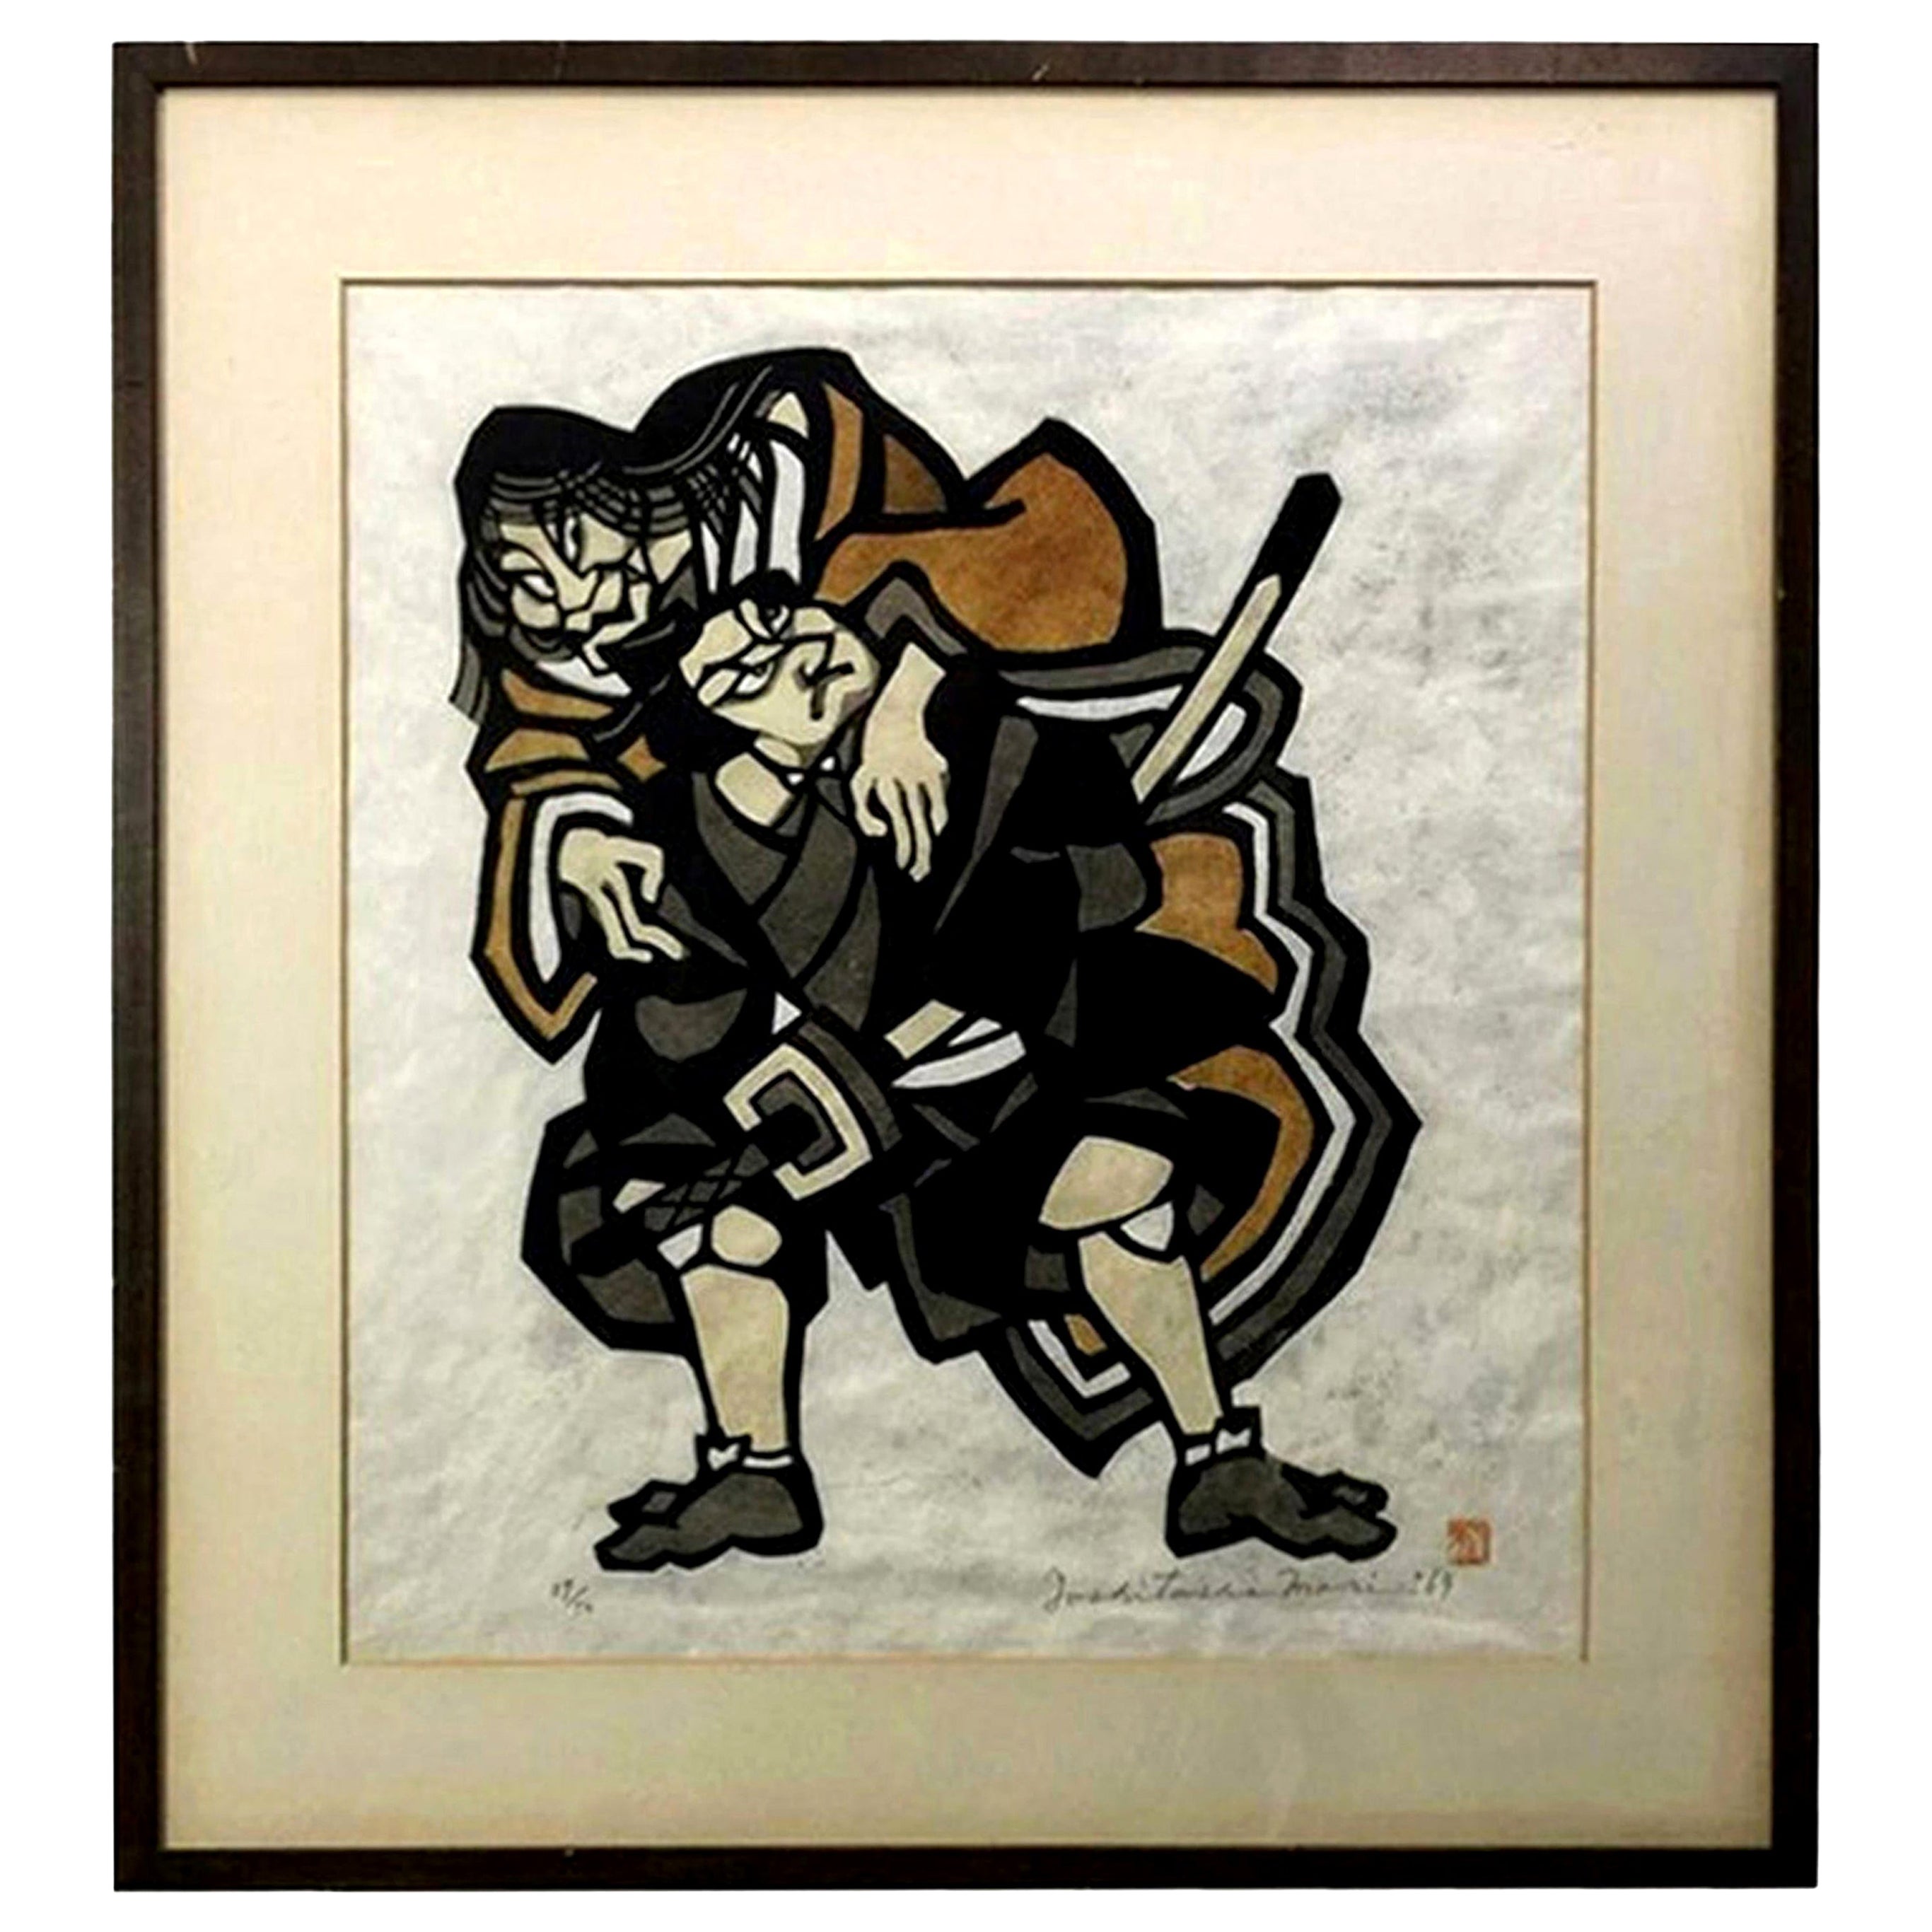 Yoshitoshi Mori Signed Limited Edition Japanese Woodblock Stencil Print, 1969 For Sale